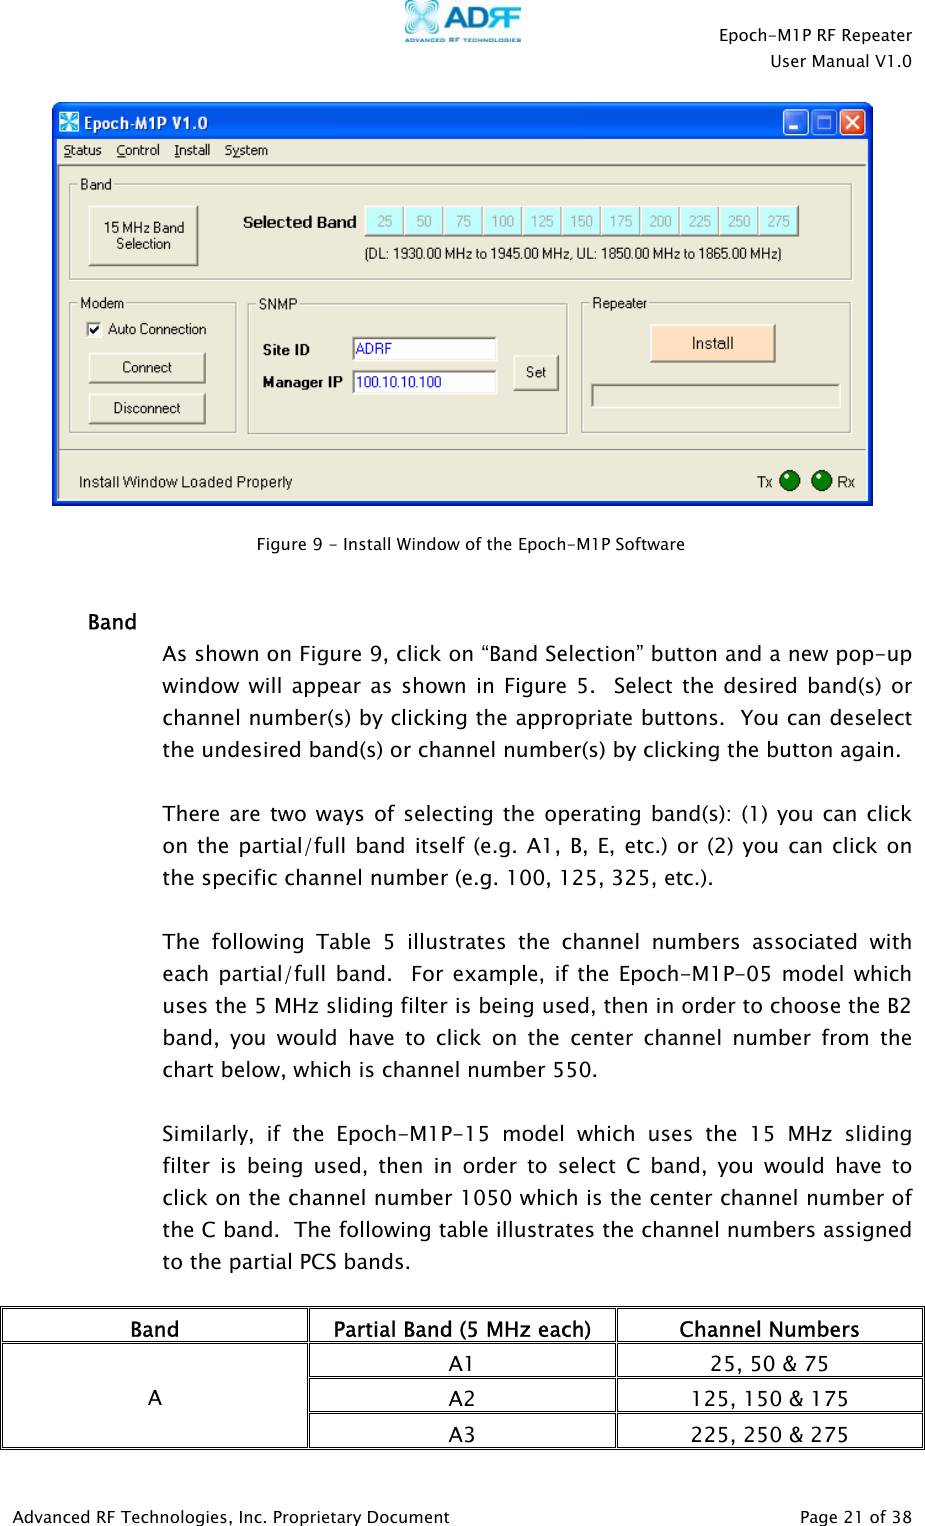    Epoch-M1P RF Repeater  User Manual V1.0    Figure 9 - Install Window of the Epoch-M1P Software    Band As shown on Figure 9, click on “Band Selection” button and a new pop-up window will appear as shown in Figure 5.  Select the desired band(s) or channel number(s) by clicking the appropriate buttons.  You can deselect the undesired band(s) or channel number(s) by clicking the button again.    There are two ways of selecting the operating band(s): (1) you can click on the partial/full band itself (e.g. A1, B, E, etc.) or (2) you can click on the specific channel number (e.g. 100, 125, 325, etc.).  The following Table 5 illustrates the channel numbers associated with each partial/full band.  For example, if the Epoch-M1P-05 model which uses the 5 MHz sliding filter is being used, then in order to choose the B2 band, you would have to click on the center channel number from the chart below, which is channel number 550.  Similarly, if the Epoch-M1P-15 model which uses the 15 MHz sliding filter is being used, then in order to select C band, you would have to click on the channel number 1050 which is the center channel number of the C band.  The following table illustrates the channel numbers assigned to the partial PCS bands.  Band  Partial Band (5 MHz each)  Channel Numbers A1  25, 50 &amp; 75 A2  125, 150 &amp; 175 A A3  225, 250 &amp; 275 Advanced RF Technologies, Inc. Proprietary Document   Page 21 of 38  